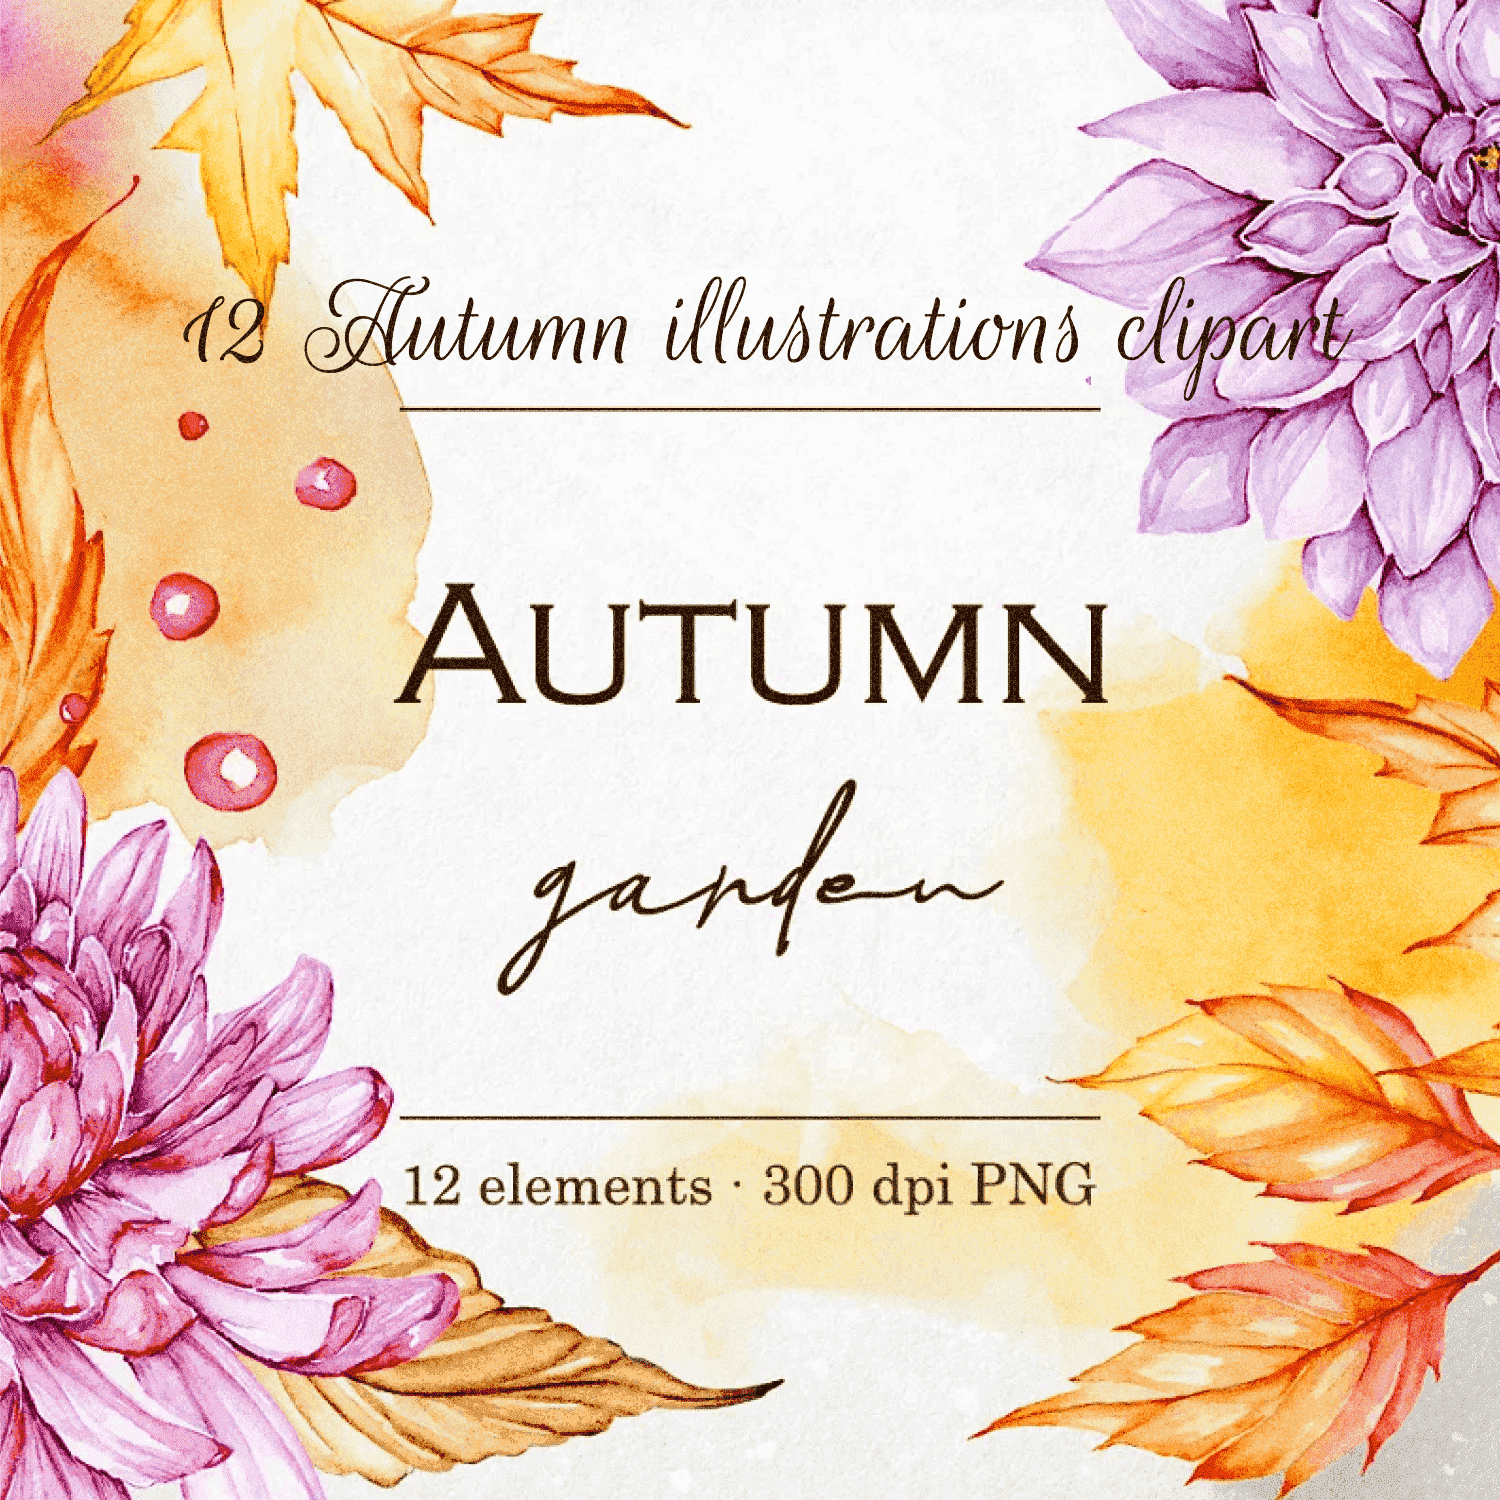 12 Autumn Illustrations Clipart - Preview Image.